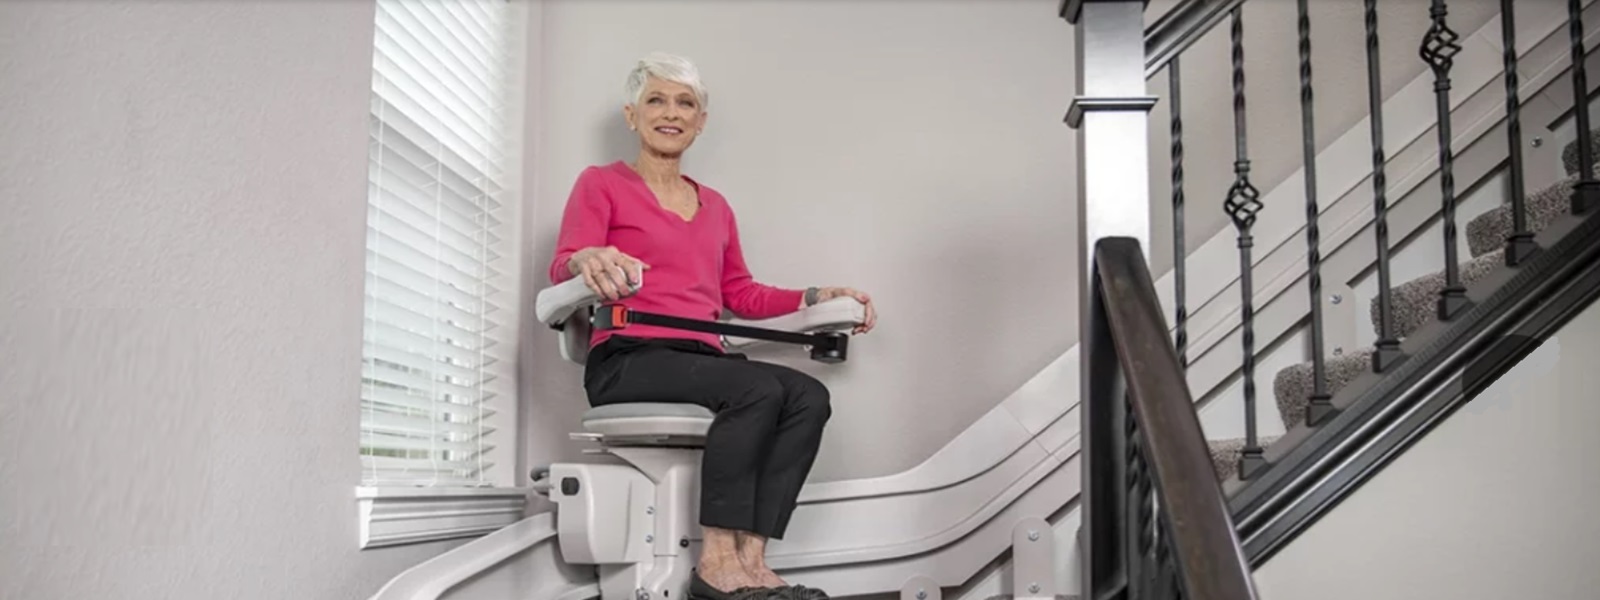 stairlifts in mass, nh and maine